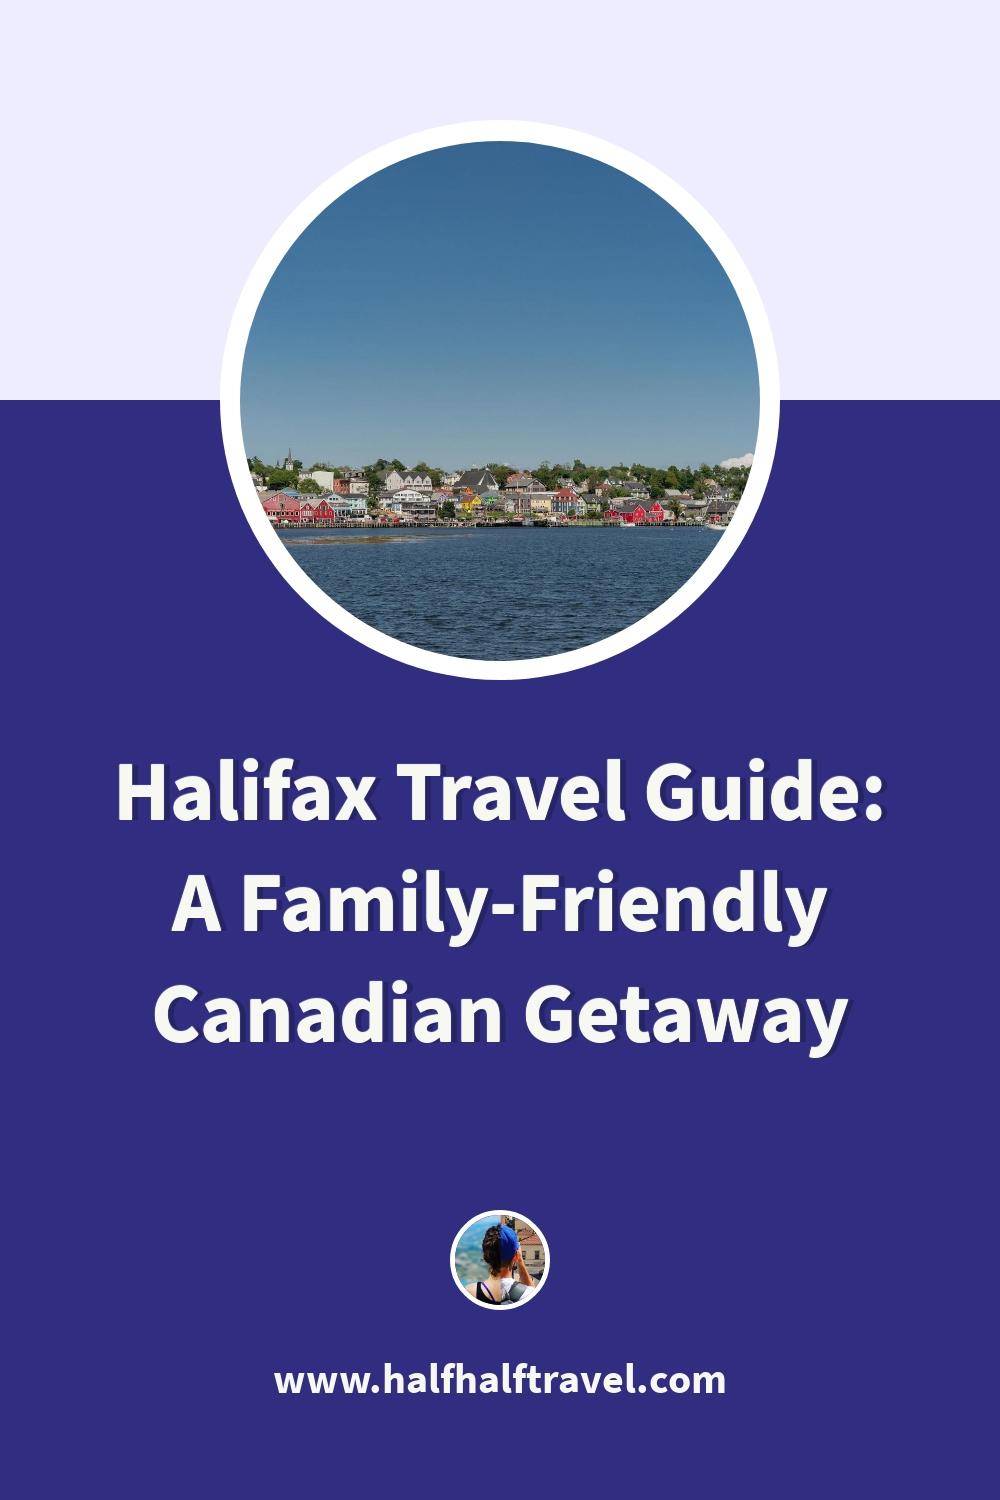 Pinterest image from the 'Halifax Travel Guide: A Family-Friendly Canadian Getaway' article on Half Half Travel